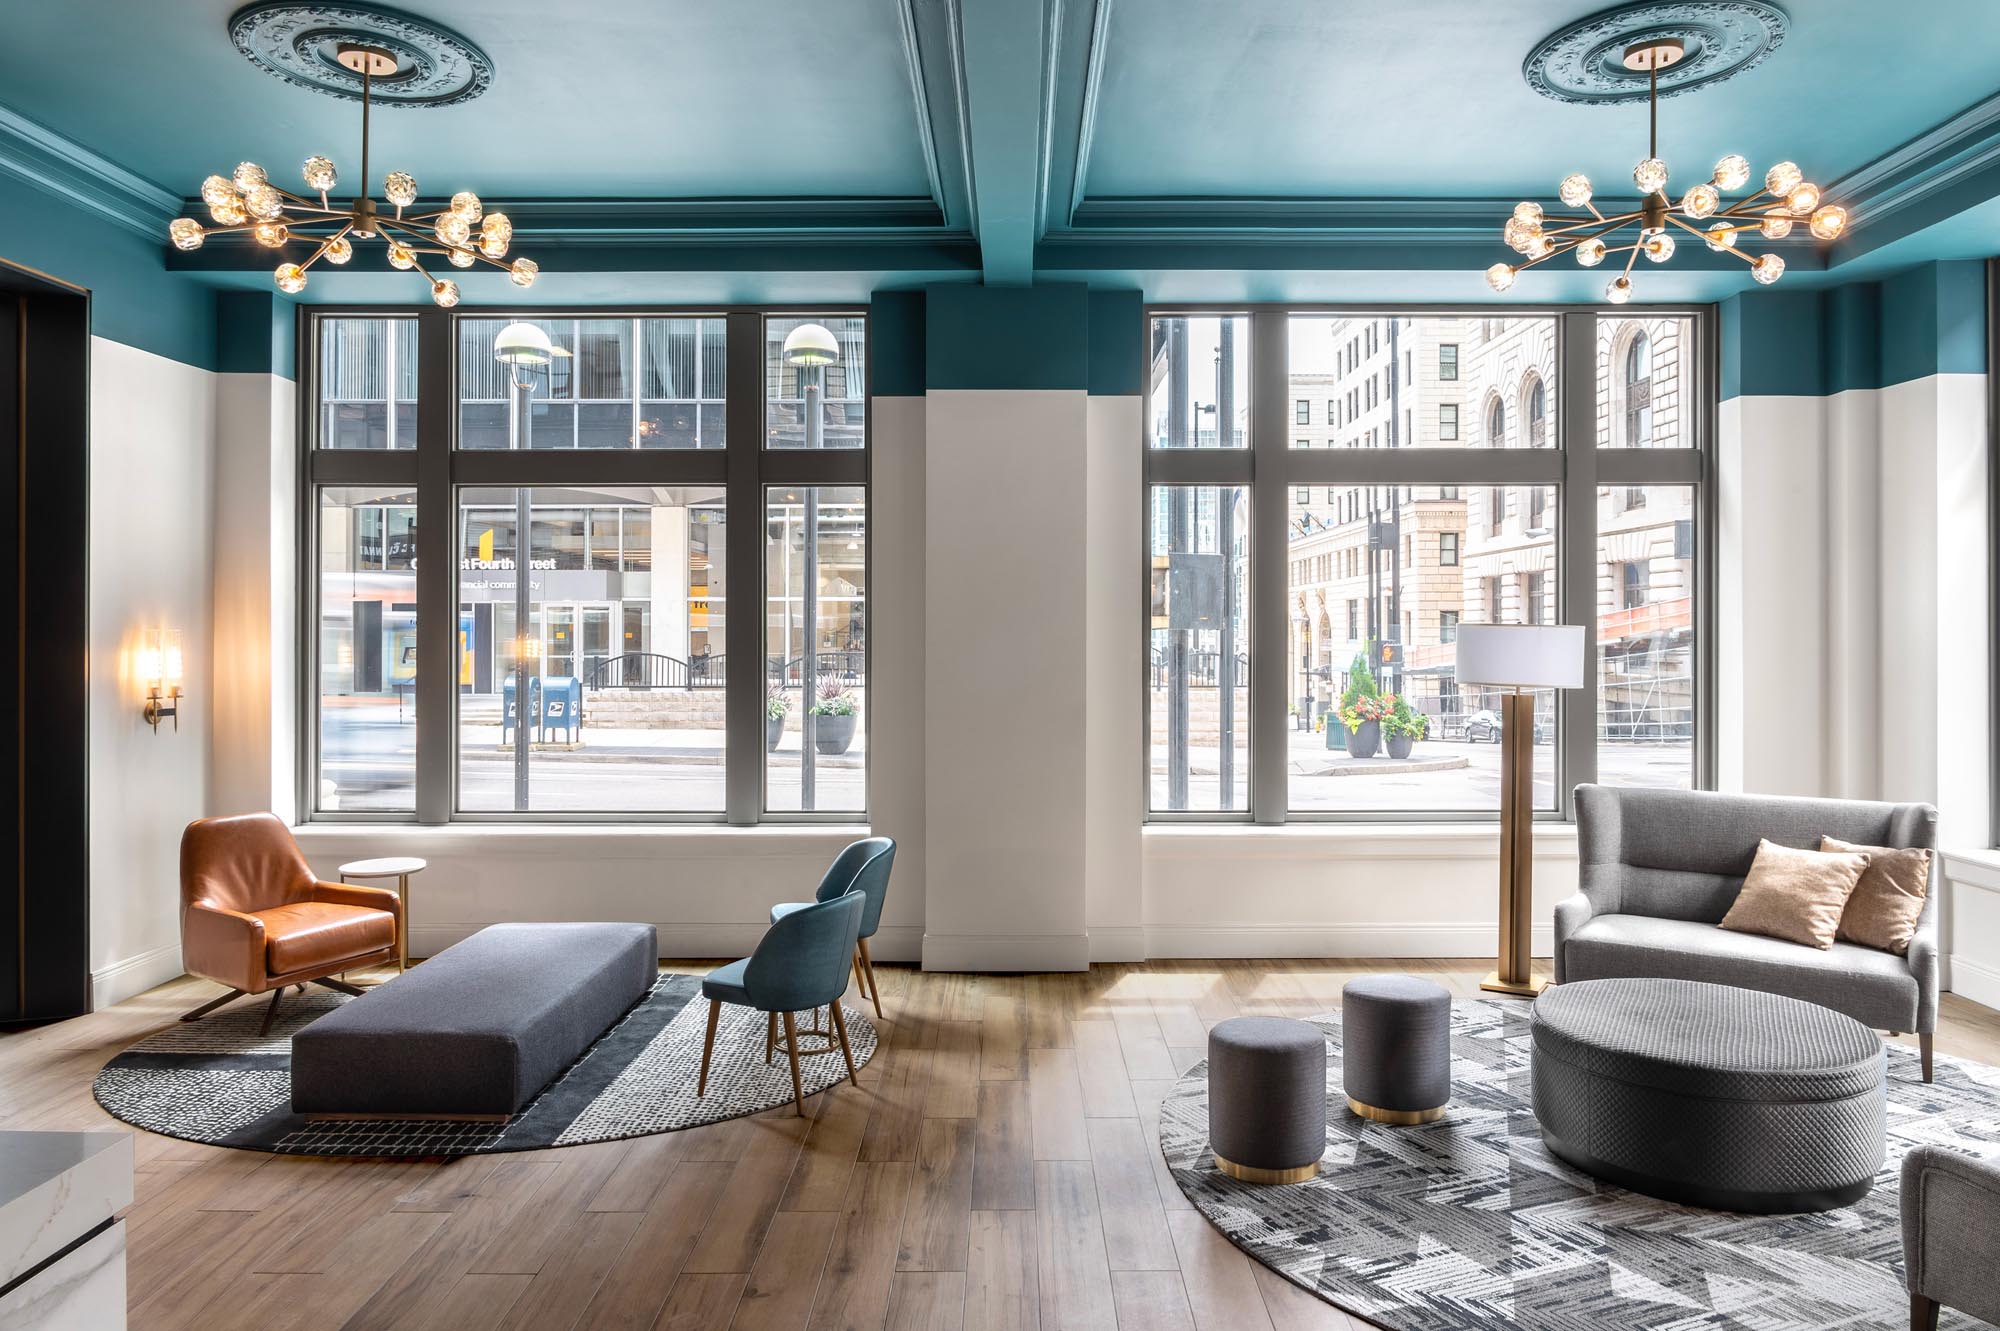 A lobby with large windows, stylish furniture, and city views. Light-colored walls contrast with teal accents. Seating includes a grey sofa, leather armchair, and teal chairs. Elegant lighting fixtures illuminate the space.